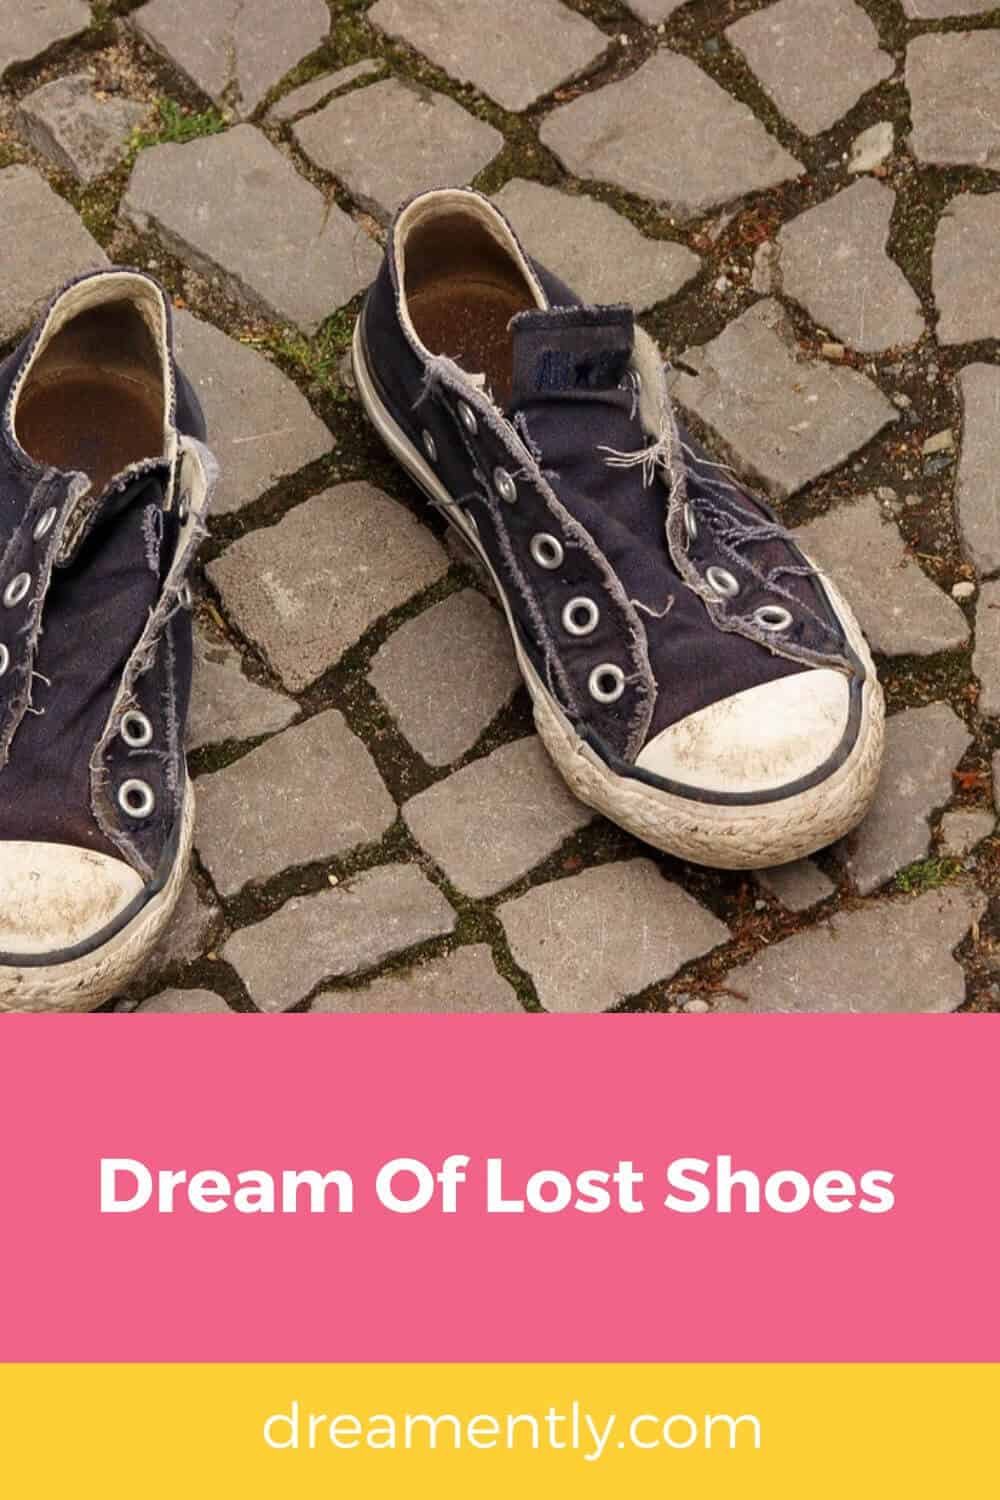 Dream Of Lost Shoes